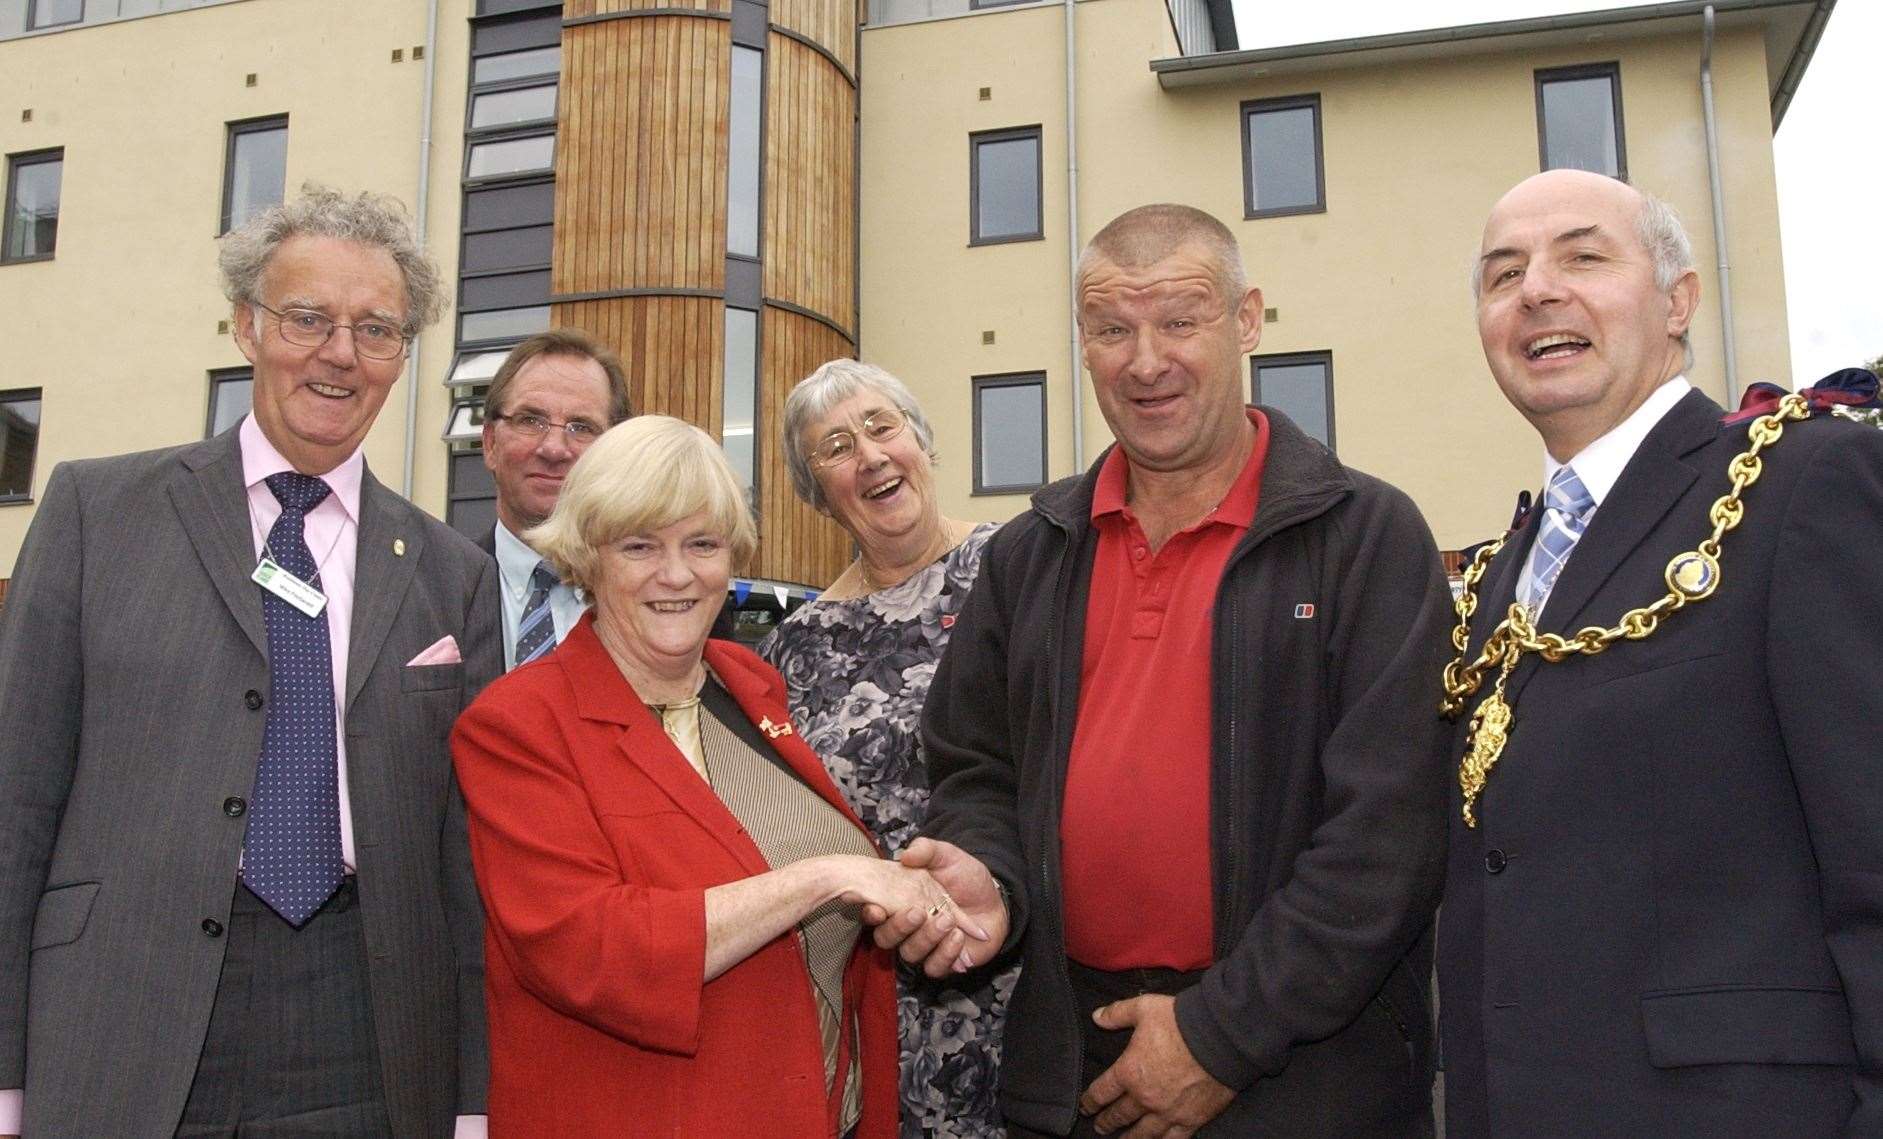 Maidstone MP Ann Widdecombe opened Lily Smith House, where Maidstone Day Centre is based, in 2004. She met client Michael Tucker, and is pictured with, from left, Mike FitzGerald, Peter Walters, Patricia McCabe and Maidstone Mayor, Cllr Peter Hooper Picture: John Wardley